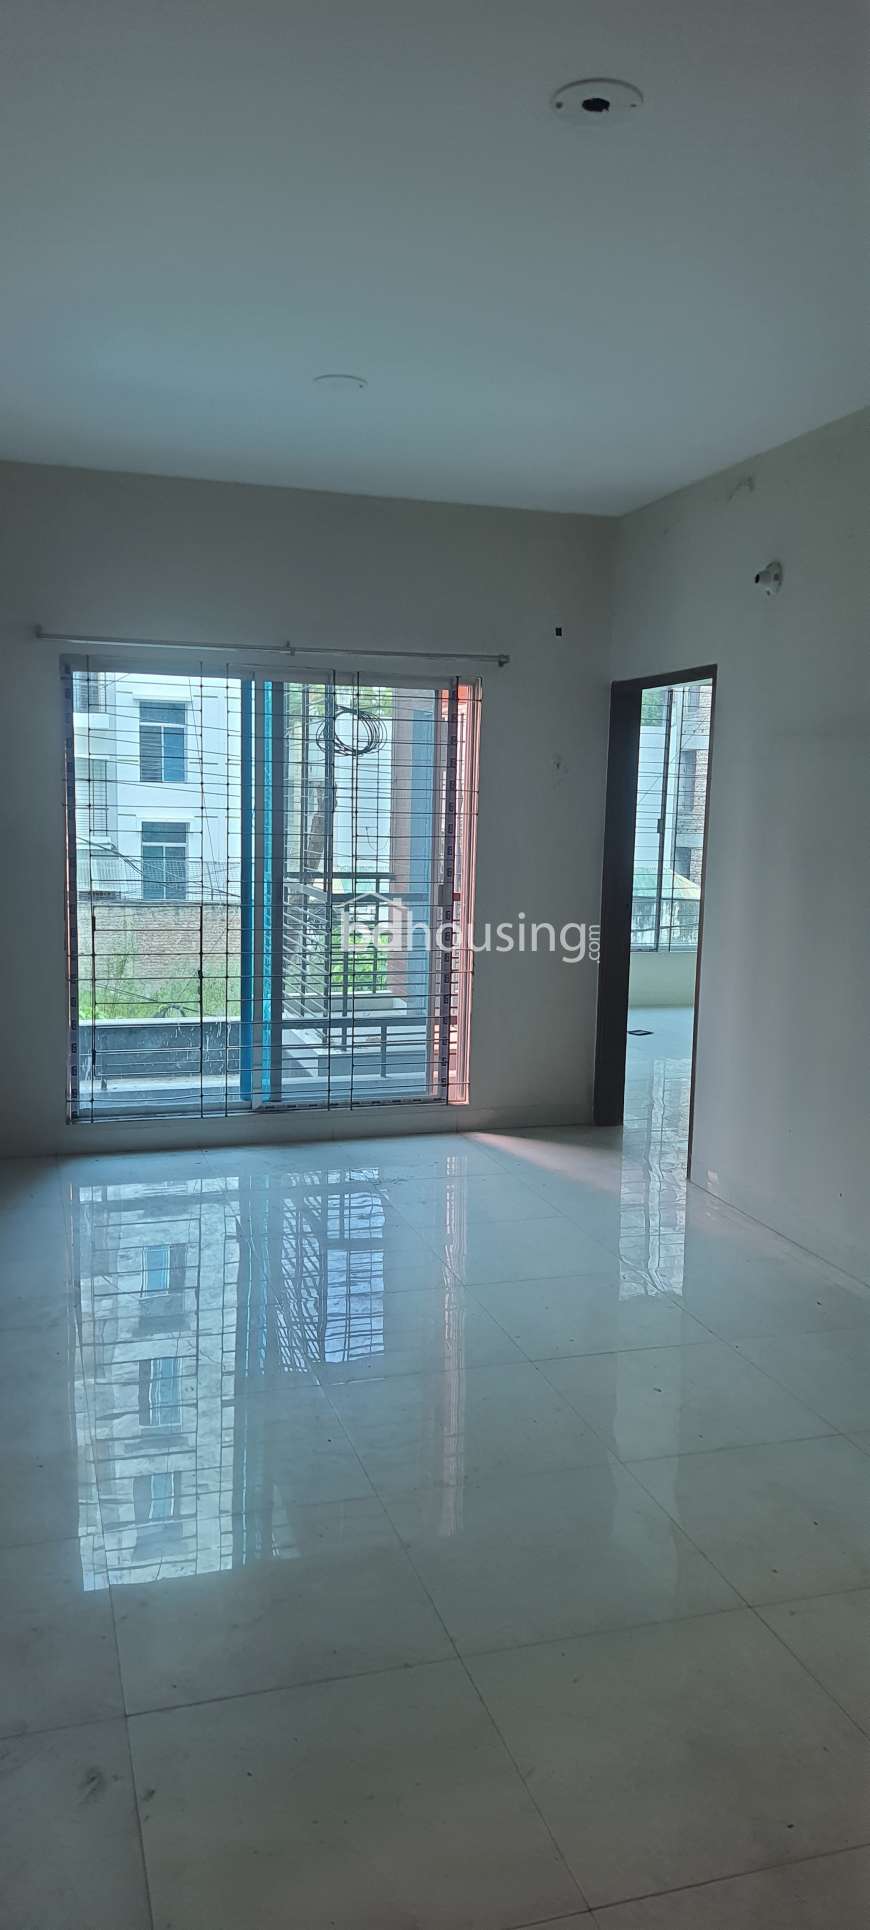 Ready 1550 sft Apartment for Sale at Block G, Bashundhara R/A, Apartment/Flats at Bashundhara R/A